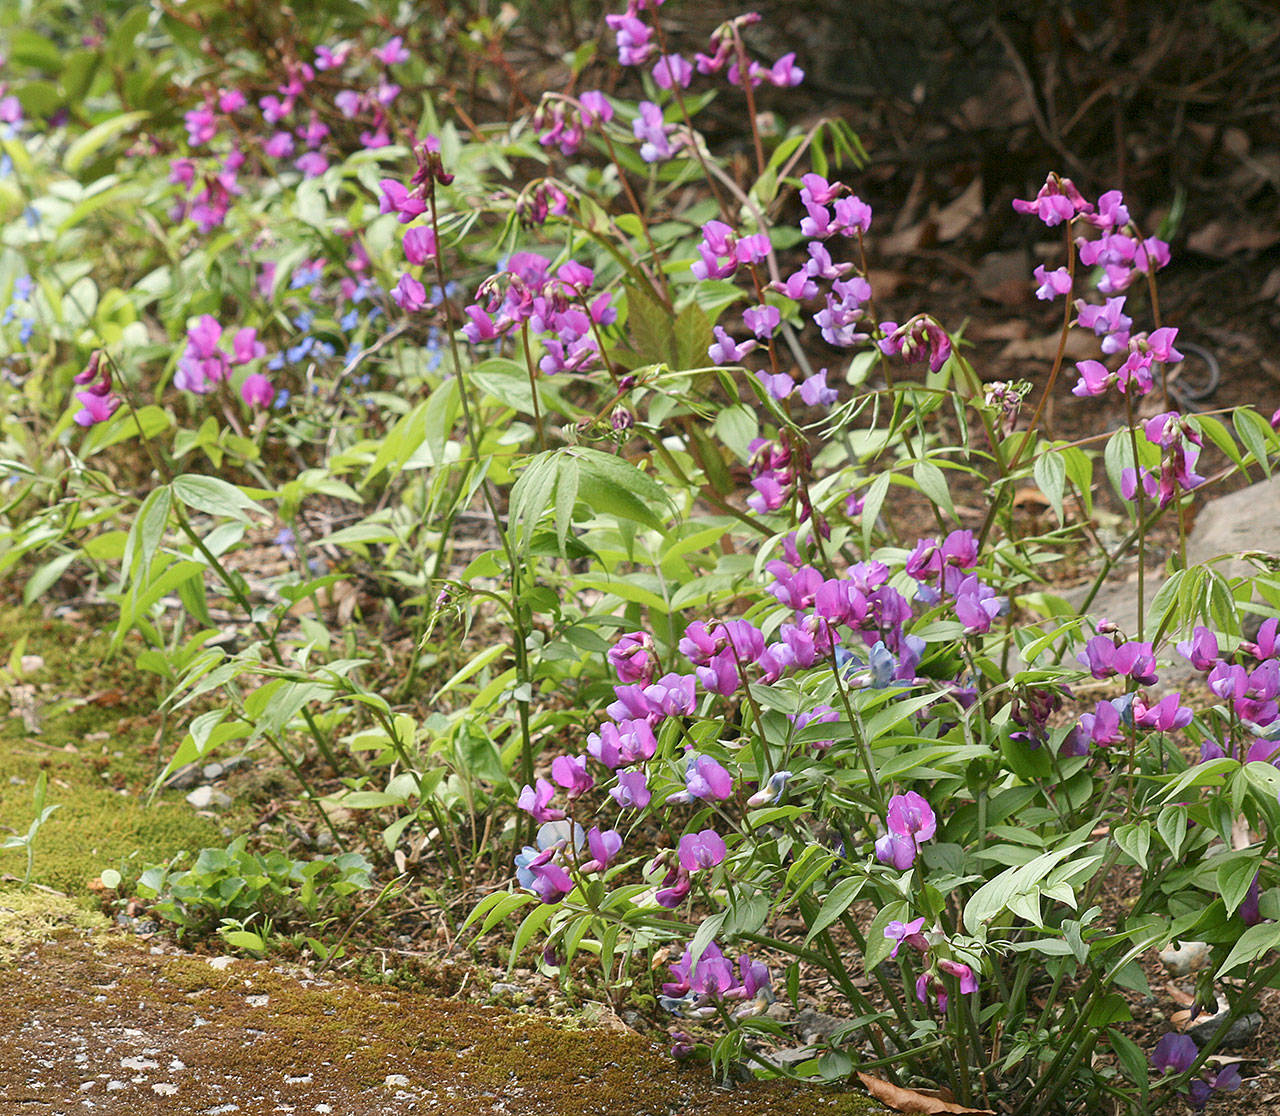 Lathyrus vernus, commonly called spring vetchling, is a little-known legume for the garden. (Richie Steffen)